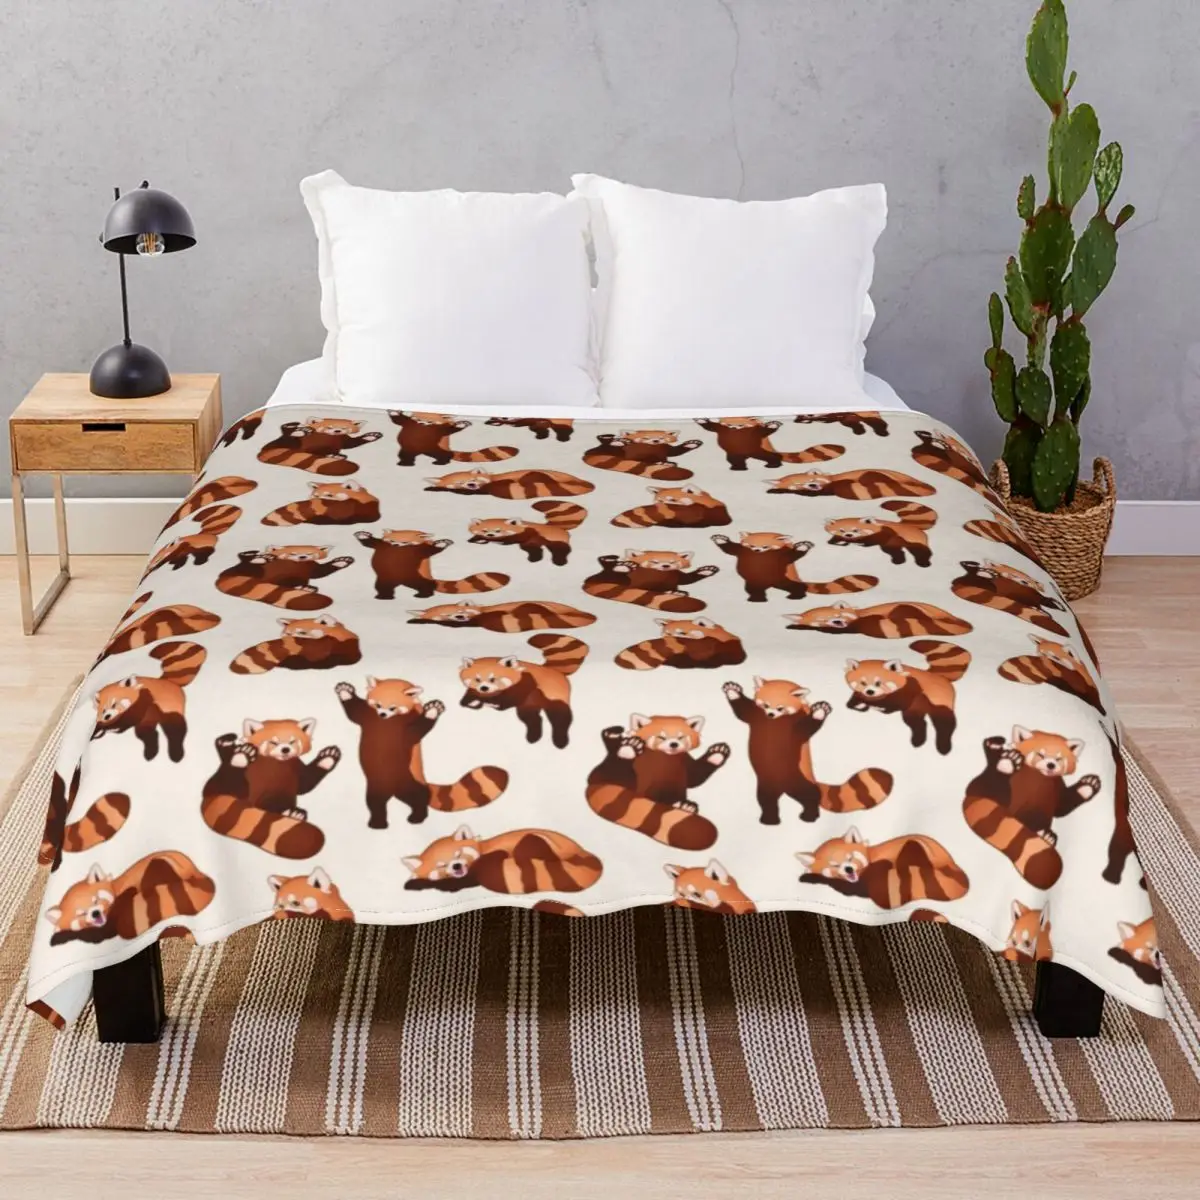 Red Panda Pattern Blankets Flannel Spring Autumn Super Warm Unisex Throw Blanket for Bedding Home Couch Travel Office